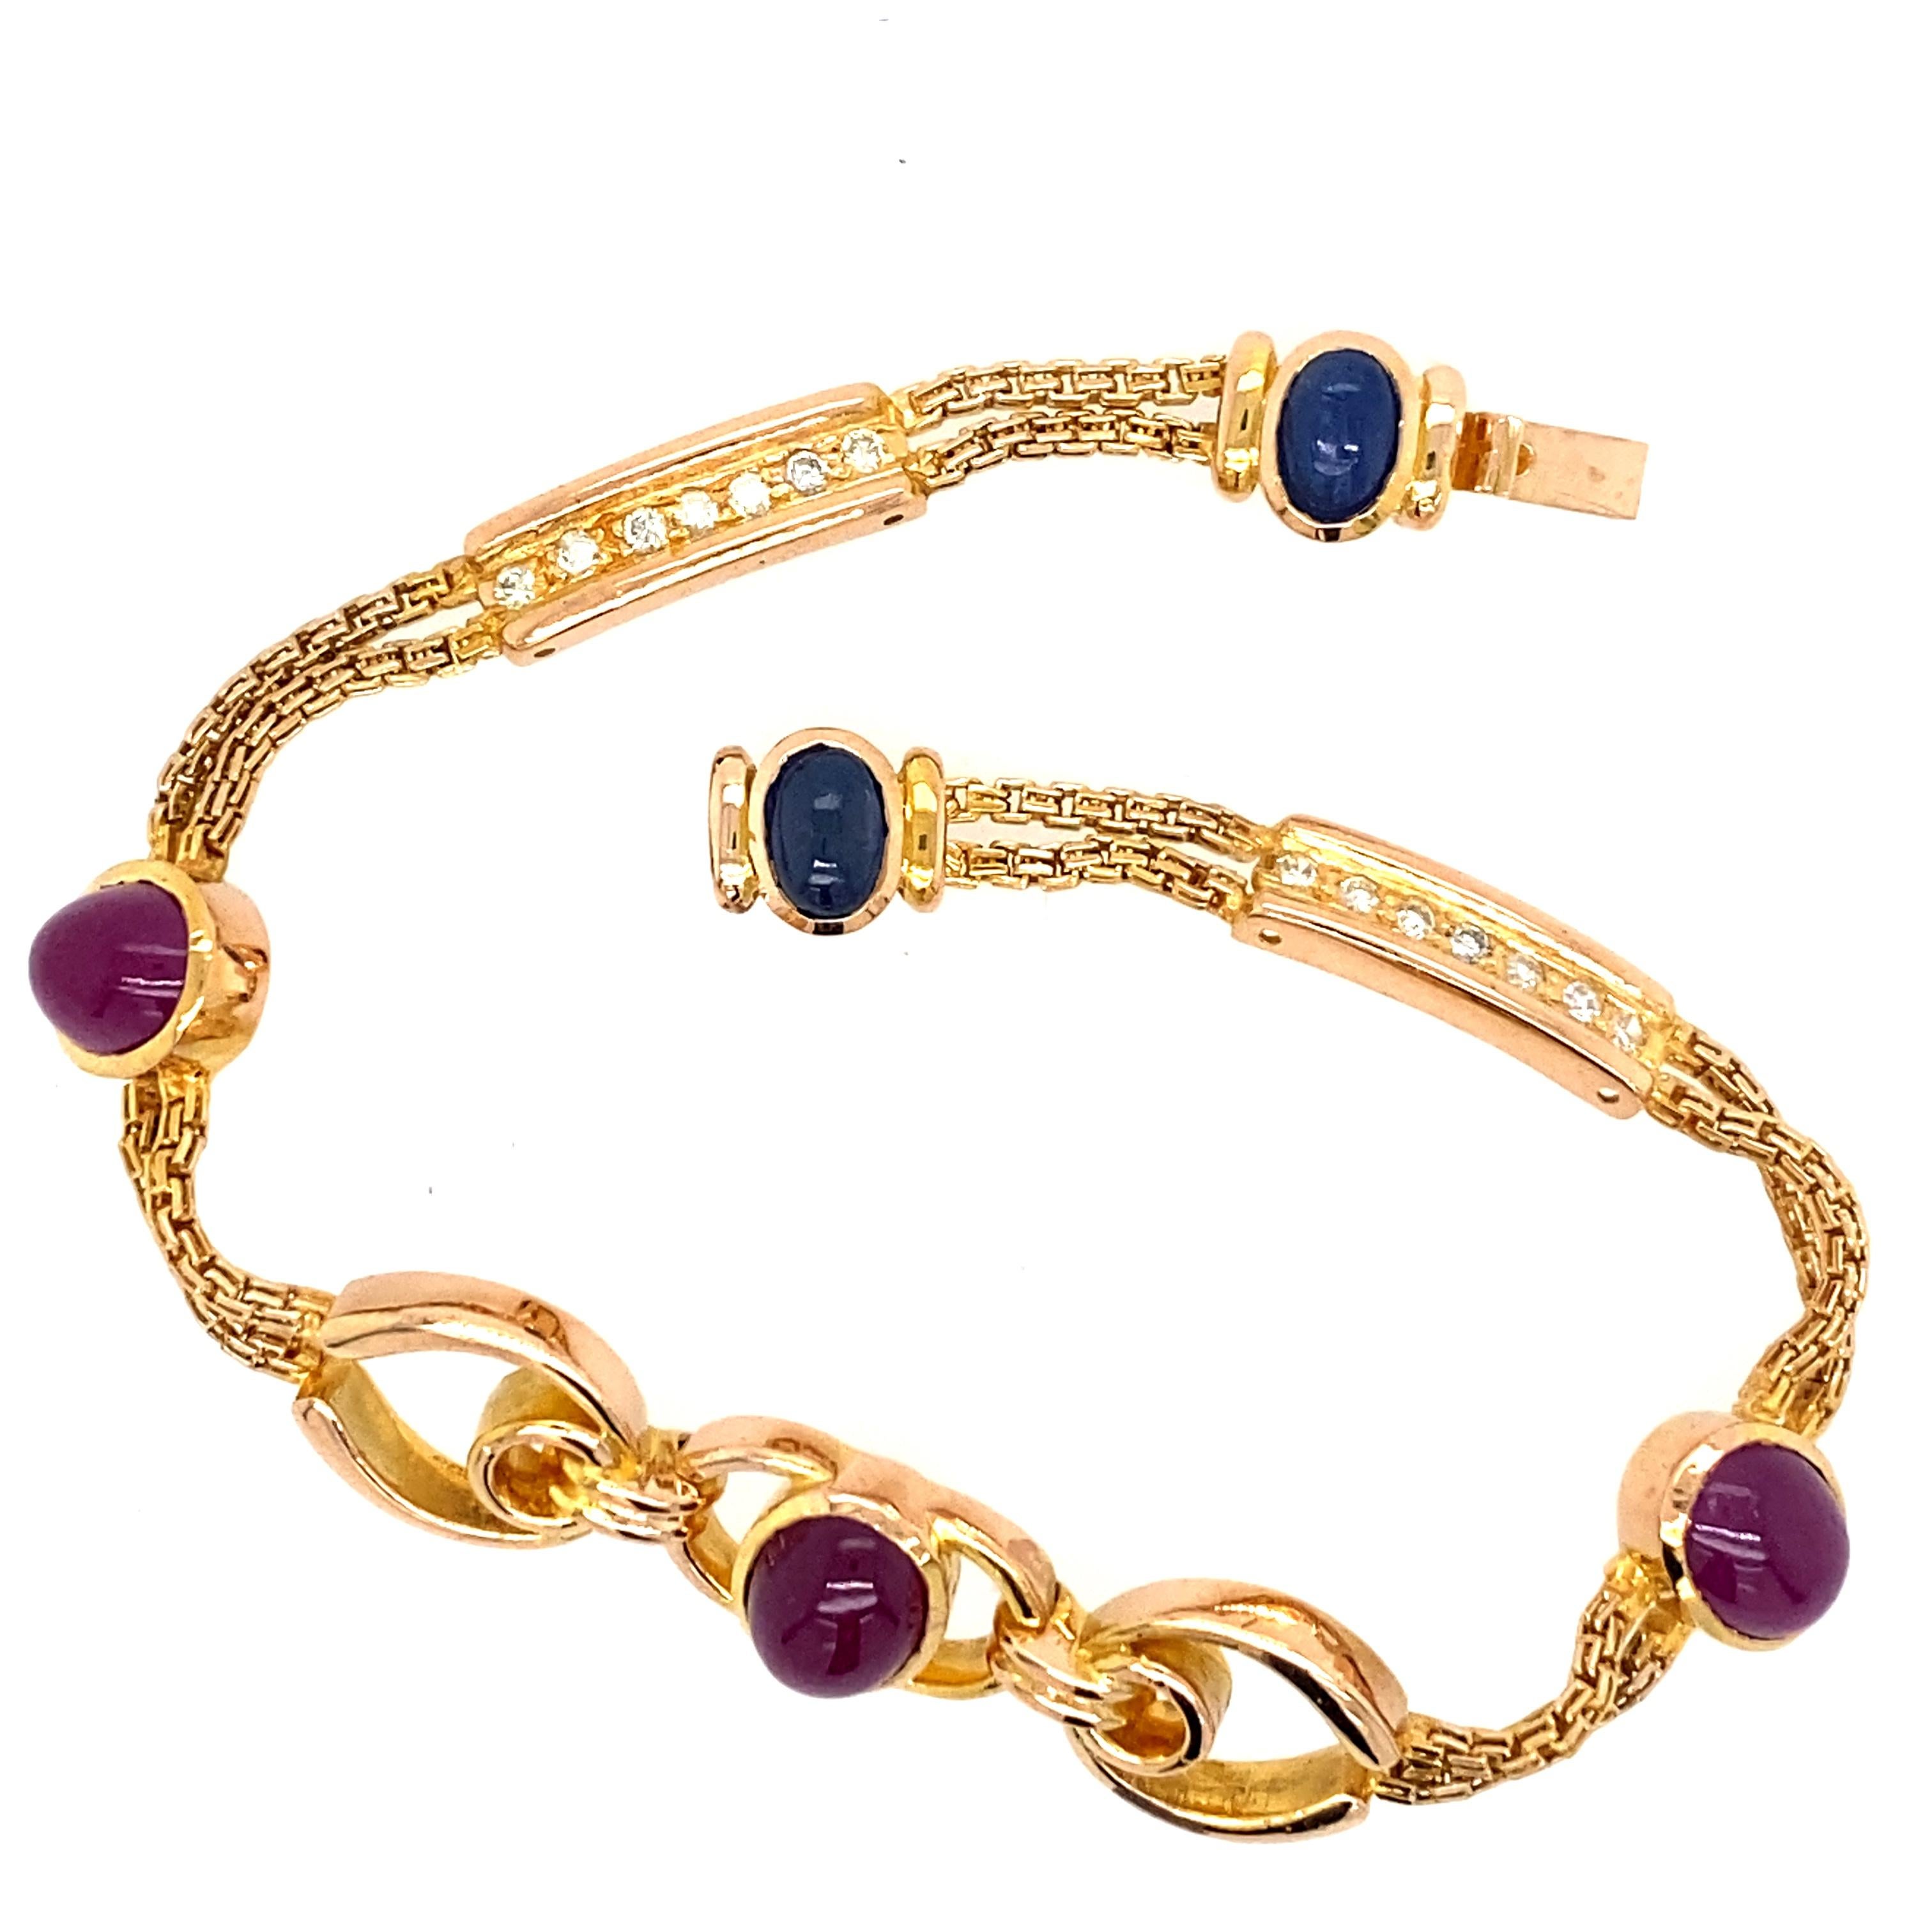 One estate 18 karat yellow gold (stamped 750) bracelet bezel set with three 8.5 x 6mm oval cabochon rubies and two 6x4mm oval cabochon sapphires. There are two bar links, each set with seven round brilliant diamonds, 0.20 carat total weight with